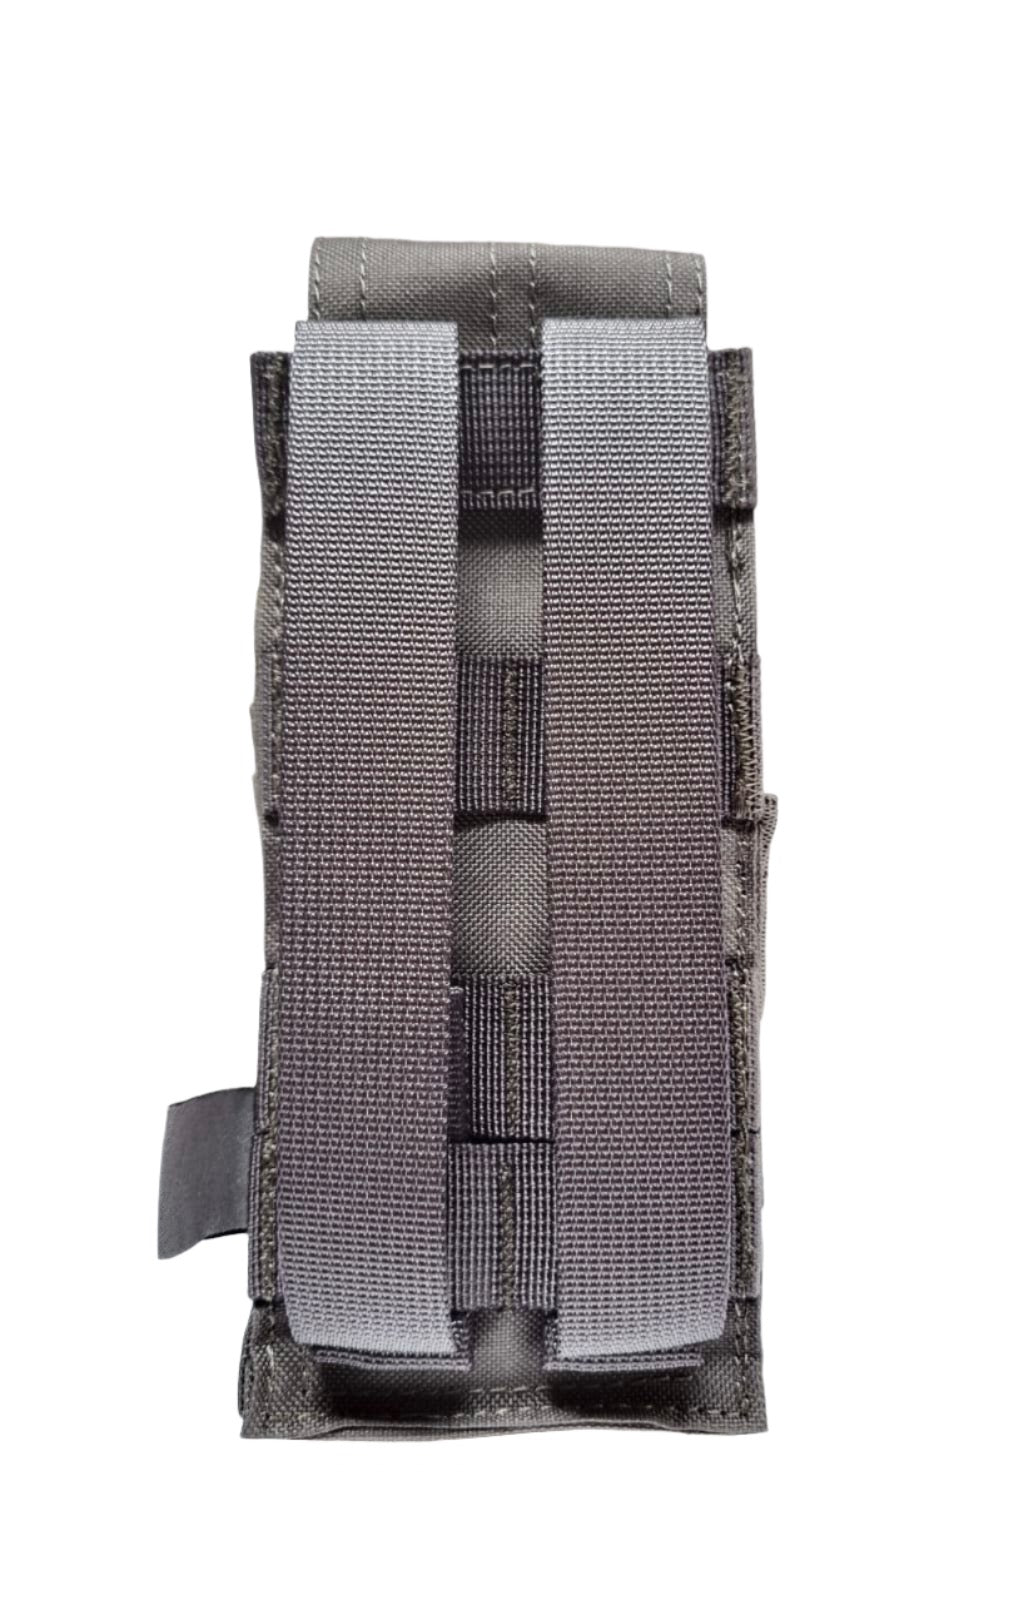 SHE-920 SINGLE M4 5.56MM MAG POUCH COLOR GREY BACKSIDE PIC